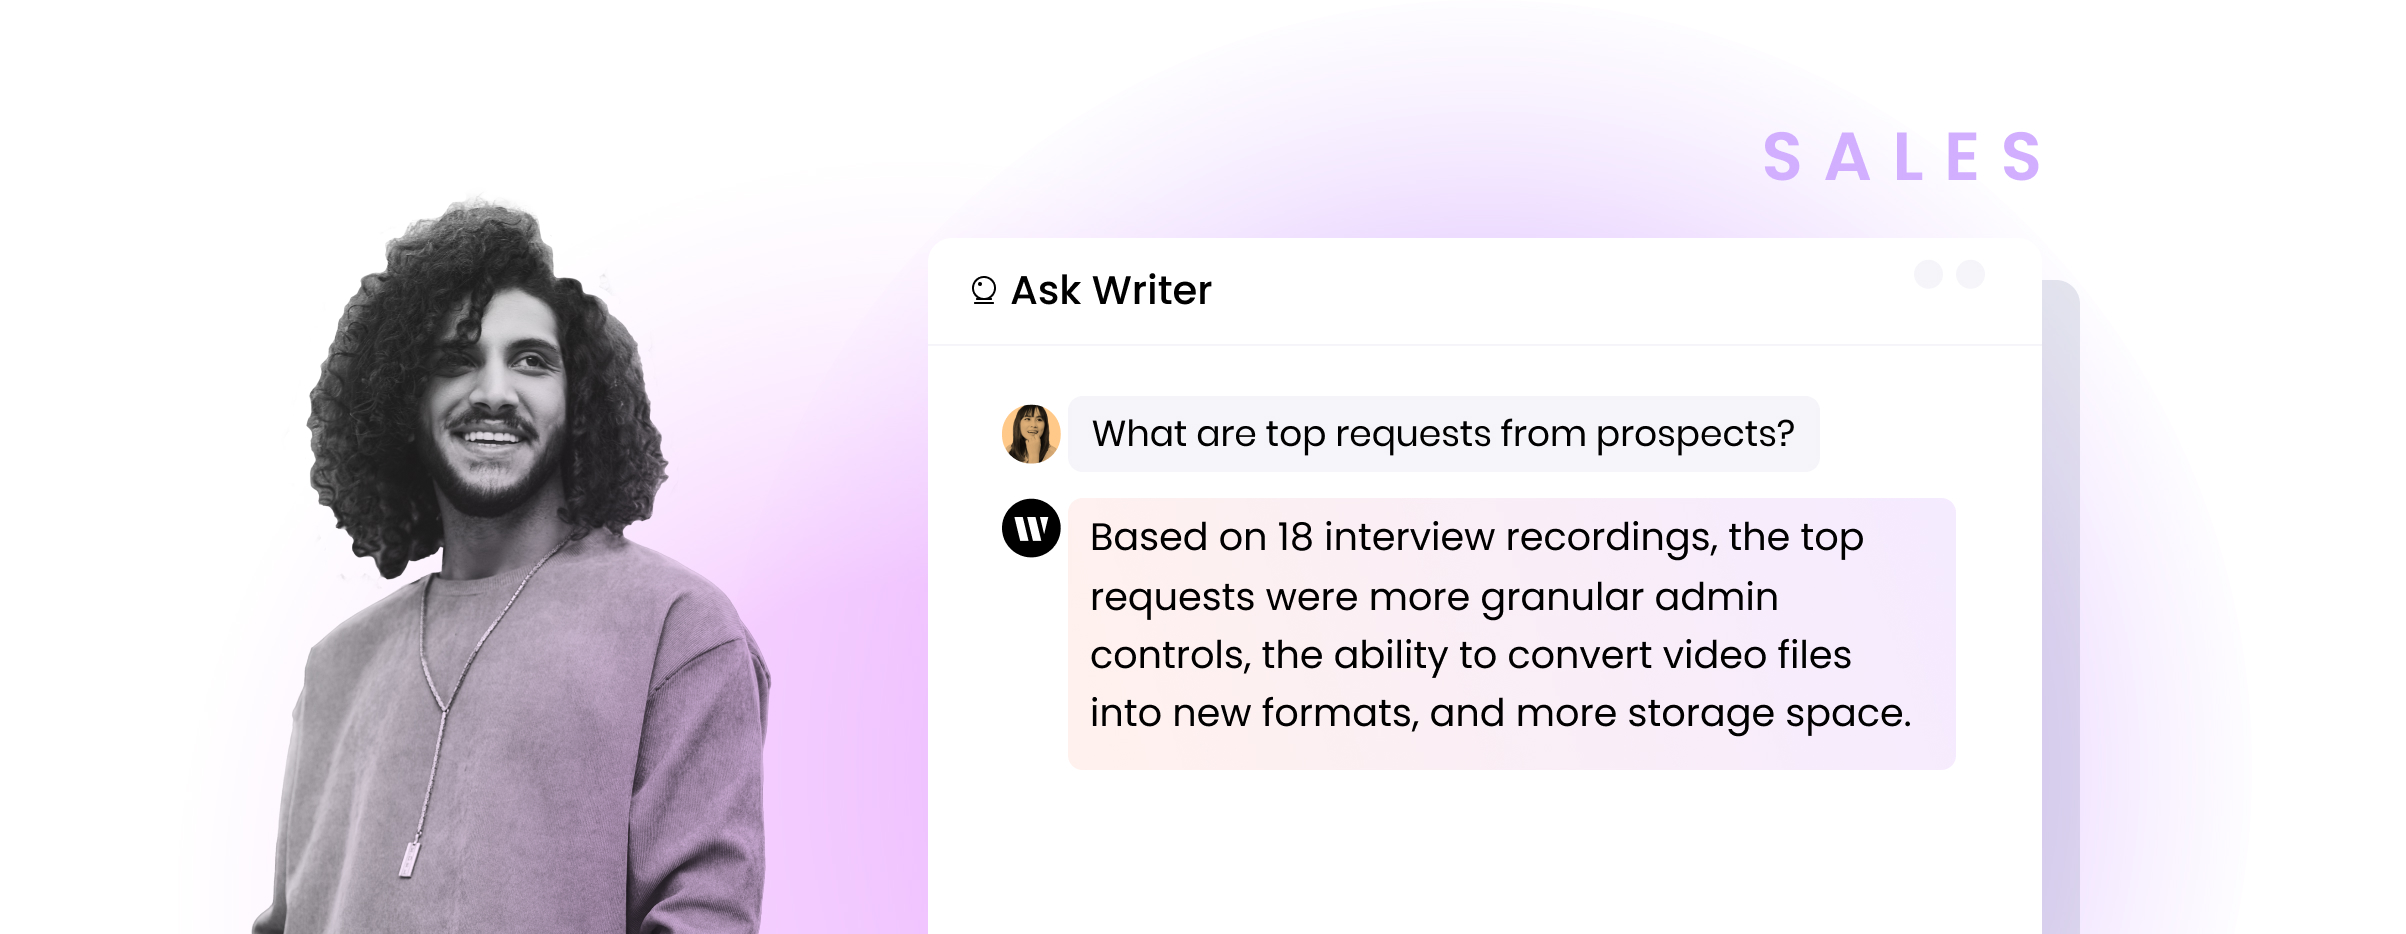 Sales person using Ask Writer. Question: What are top requests from prospects? Response: Based on 18 interview recordings, the top requests were more granular admin controls, the ability to convert video files into new formats, and more storage space.